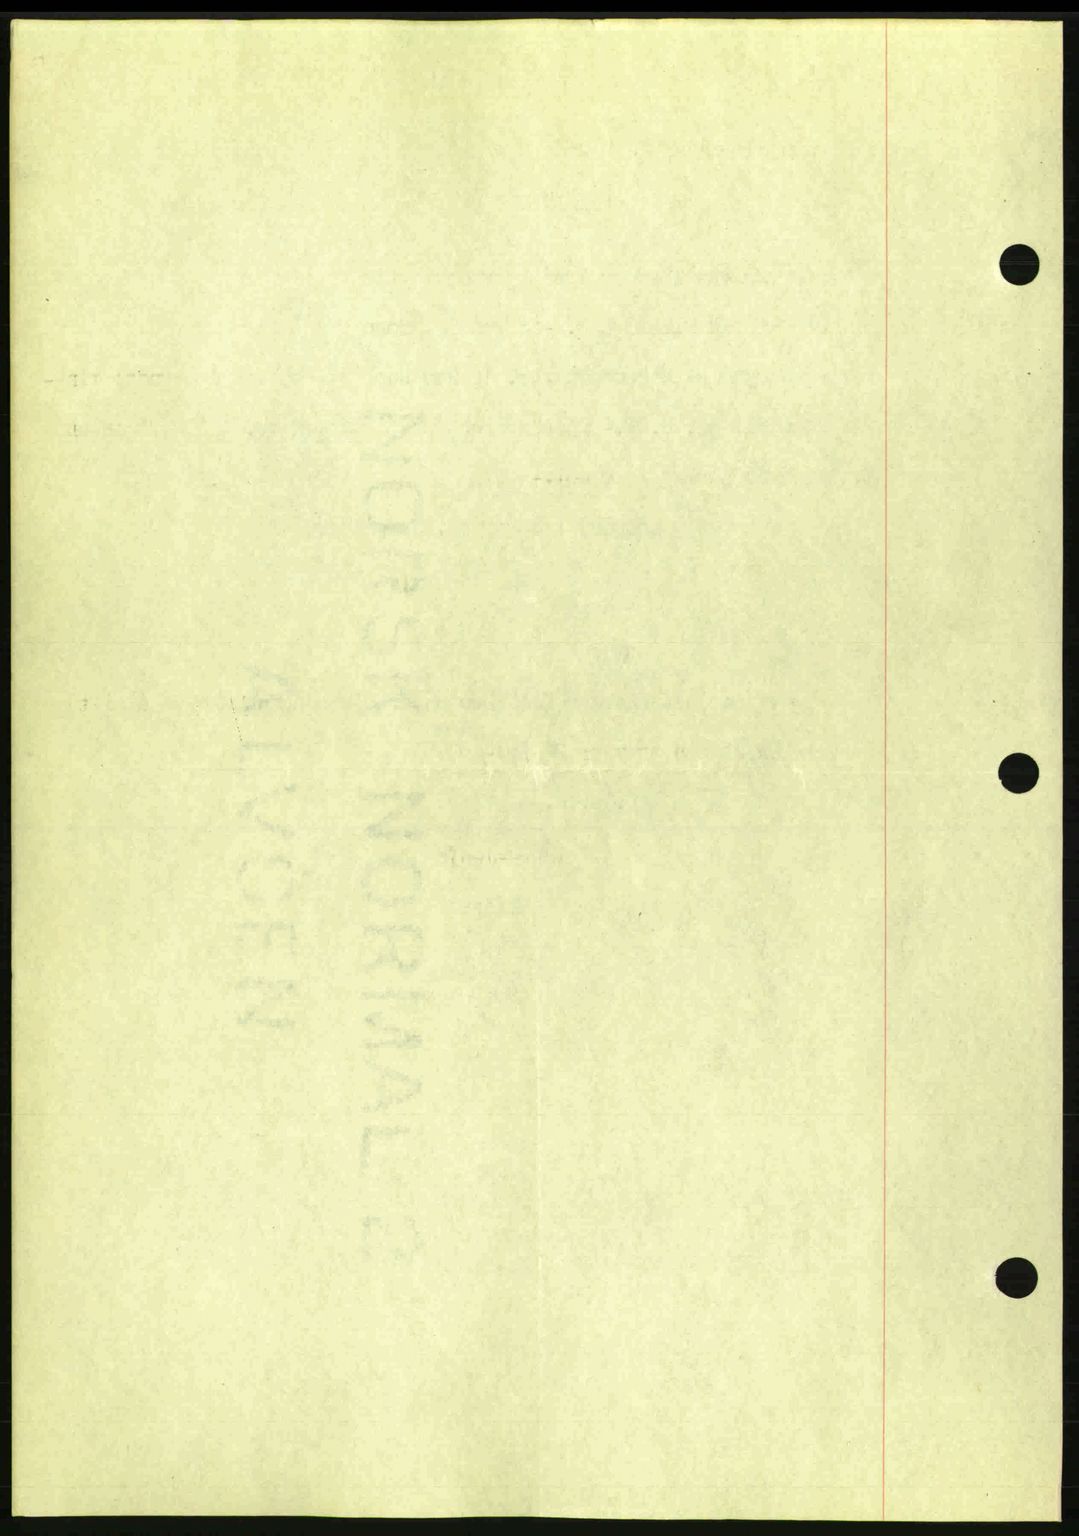 Indre Sogn tingrett, SAB/A-3301/1/G/Gb/Gba/L0030: Mortgage book no. 30, 1935-1937, Deed date: 01.03.1936